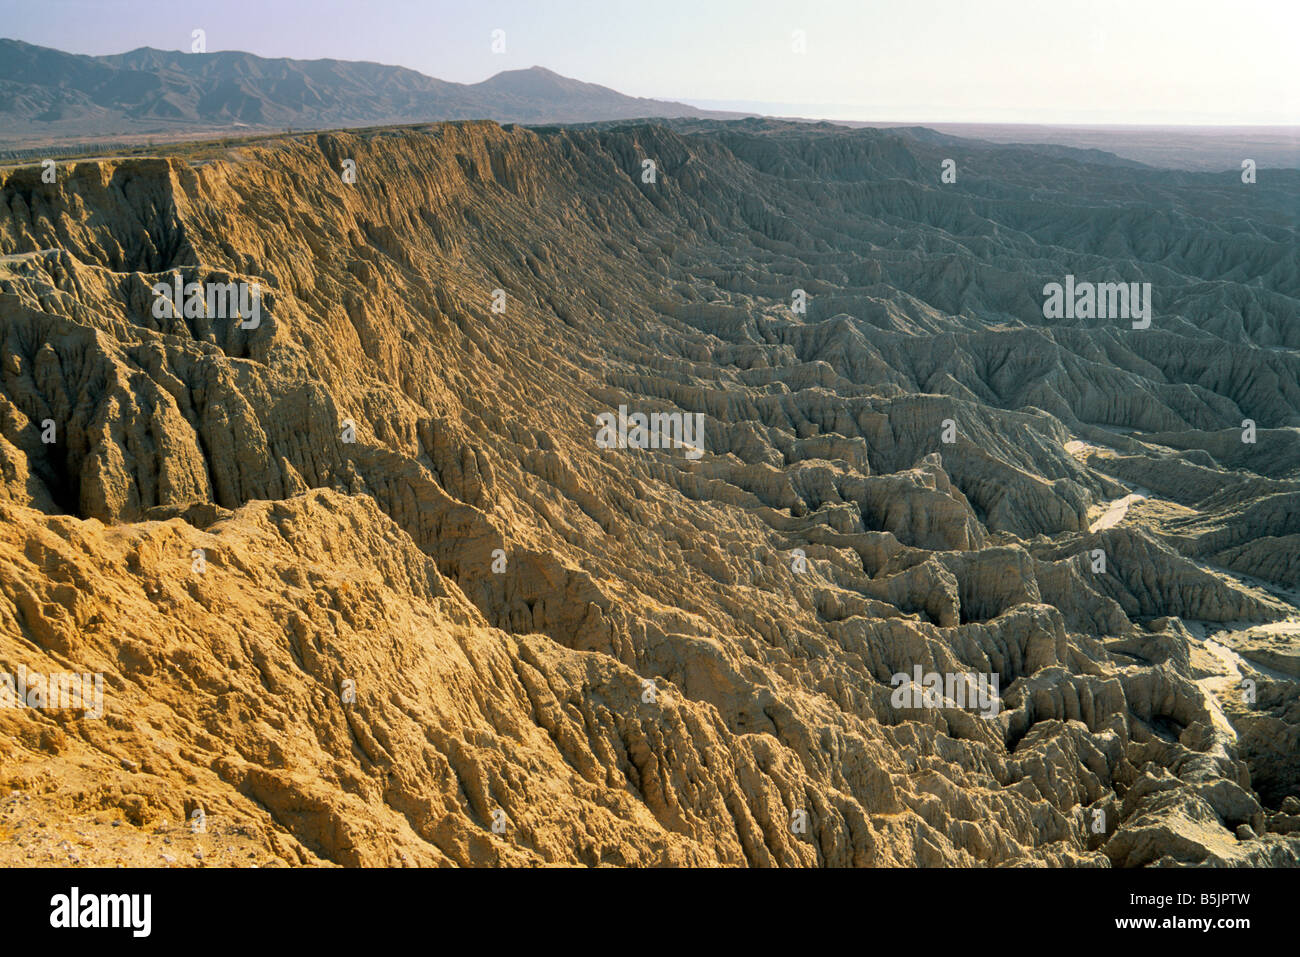 Borrego Badlands at Fonts Point, Vallecito Mts in dist, sunrise at Anza Borrego Desert State Park, California USA Stock Photo